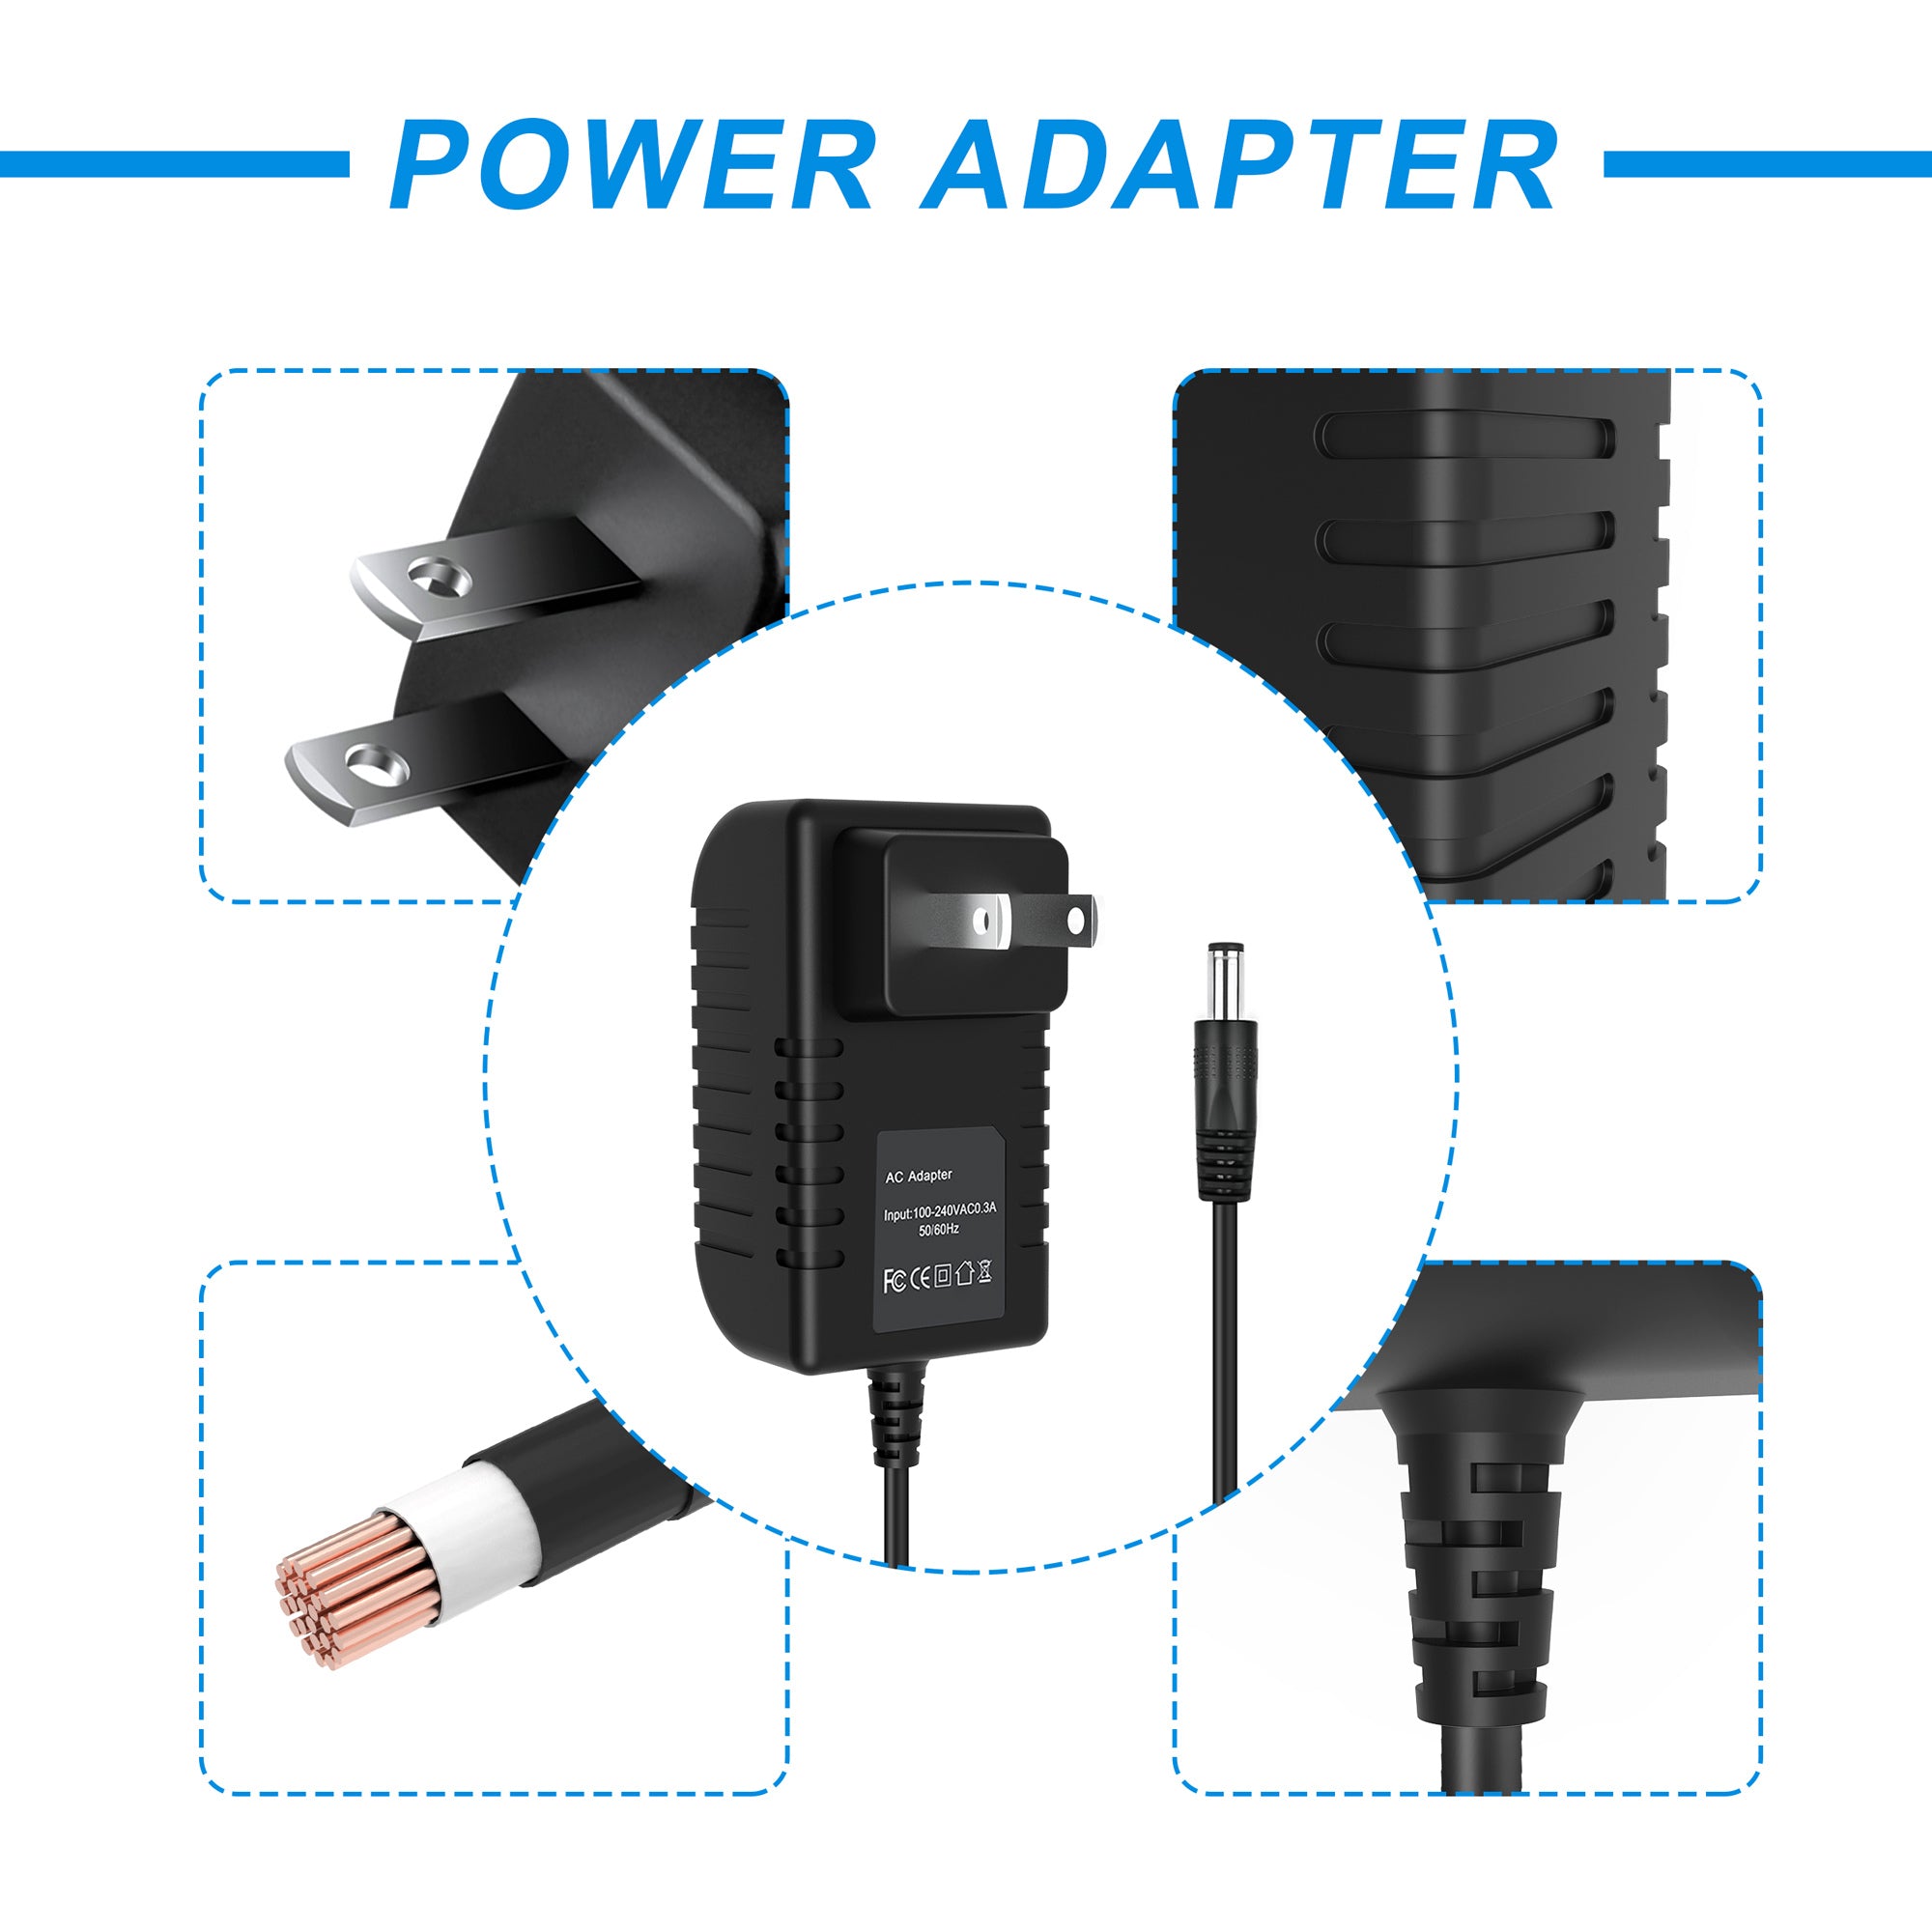 AbleGrid  6V AC/DC Adapter Compatible with Ingenuity Power Adapt Portable Swing Bingham Bunny 60730, Inlighten Cradling Swing Winslow 60633 6VDC Power Supply Cord Battery Charger Mains PSU